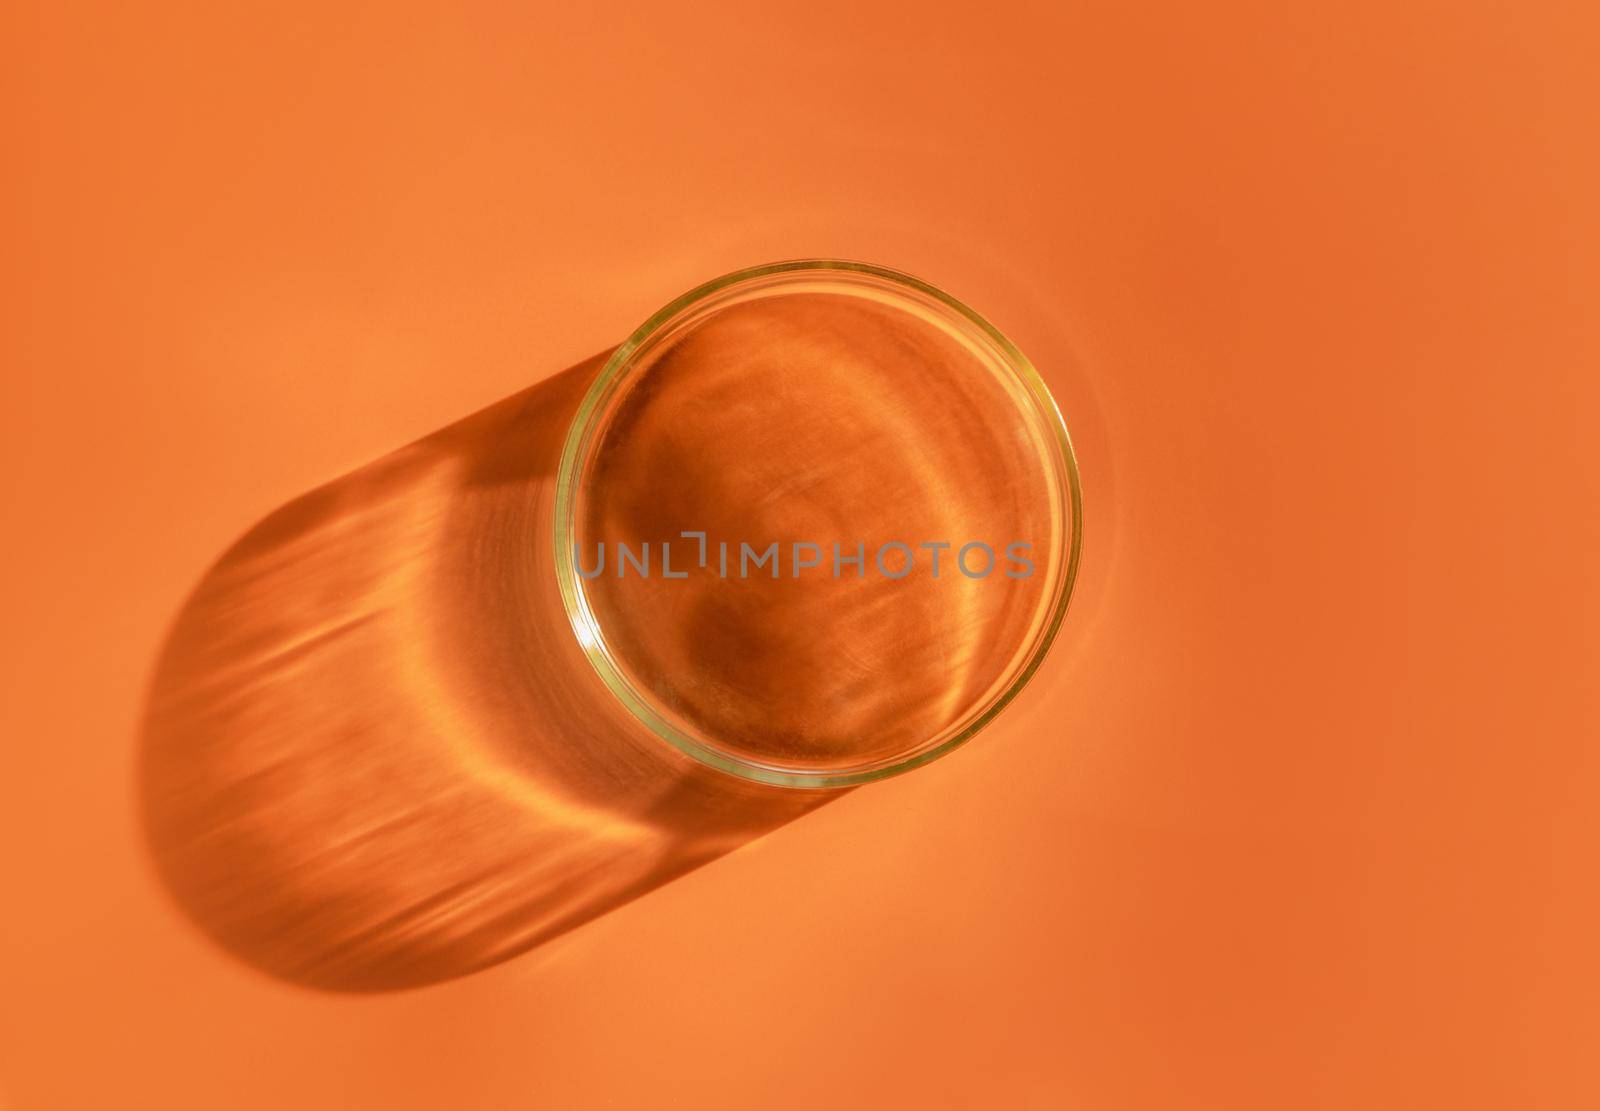 Empty laboratory glass petri for serum, oil, beauty products on orange background. Natural medicine, cosmetic research, bio science. Concept of skincare and analysis. Dermatology. Flat lay, top view